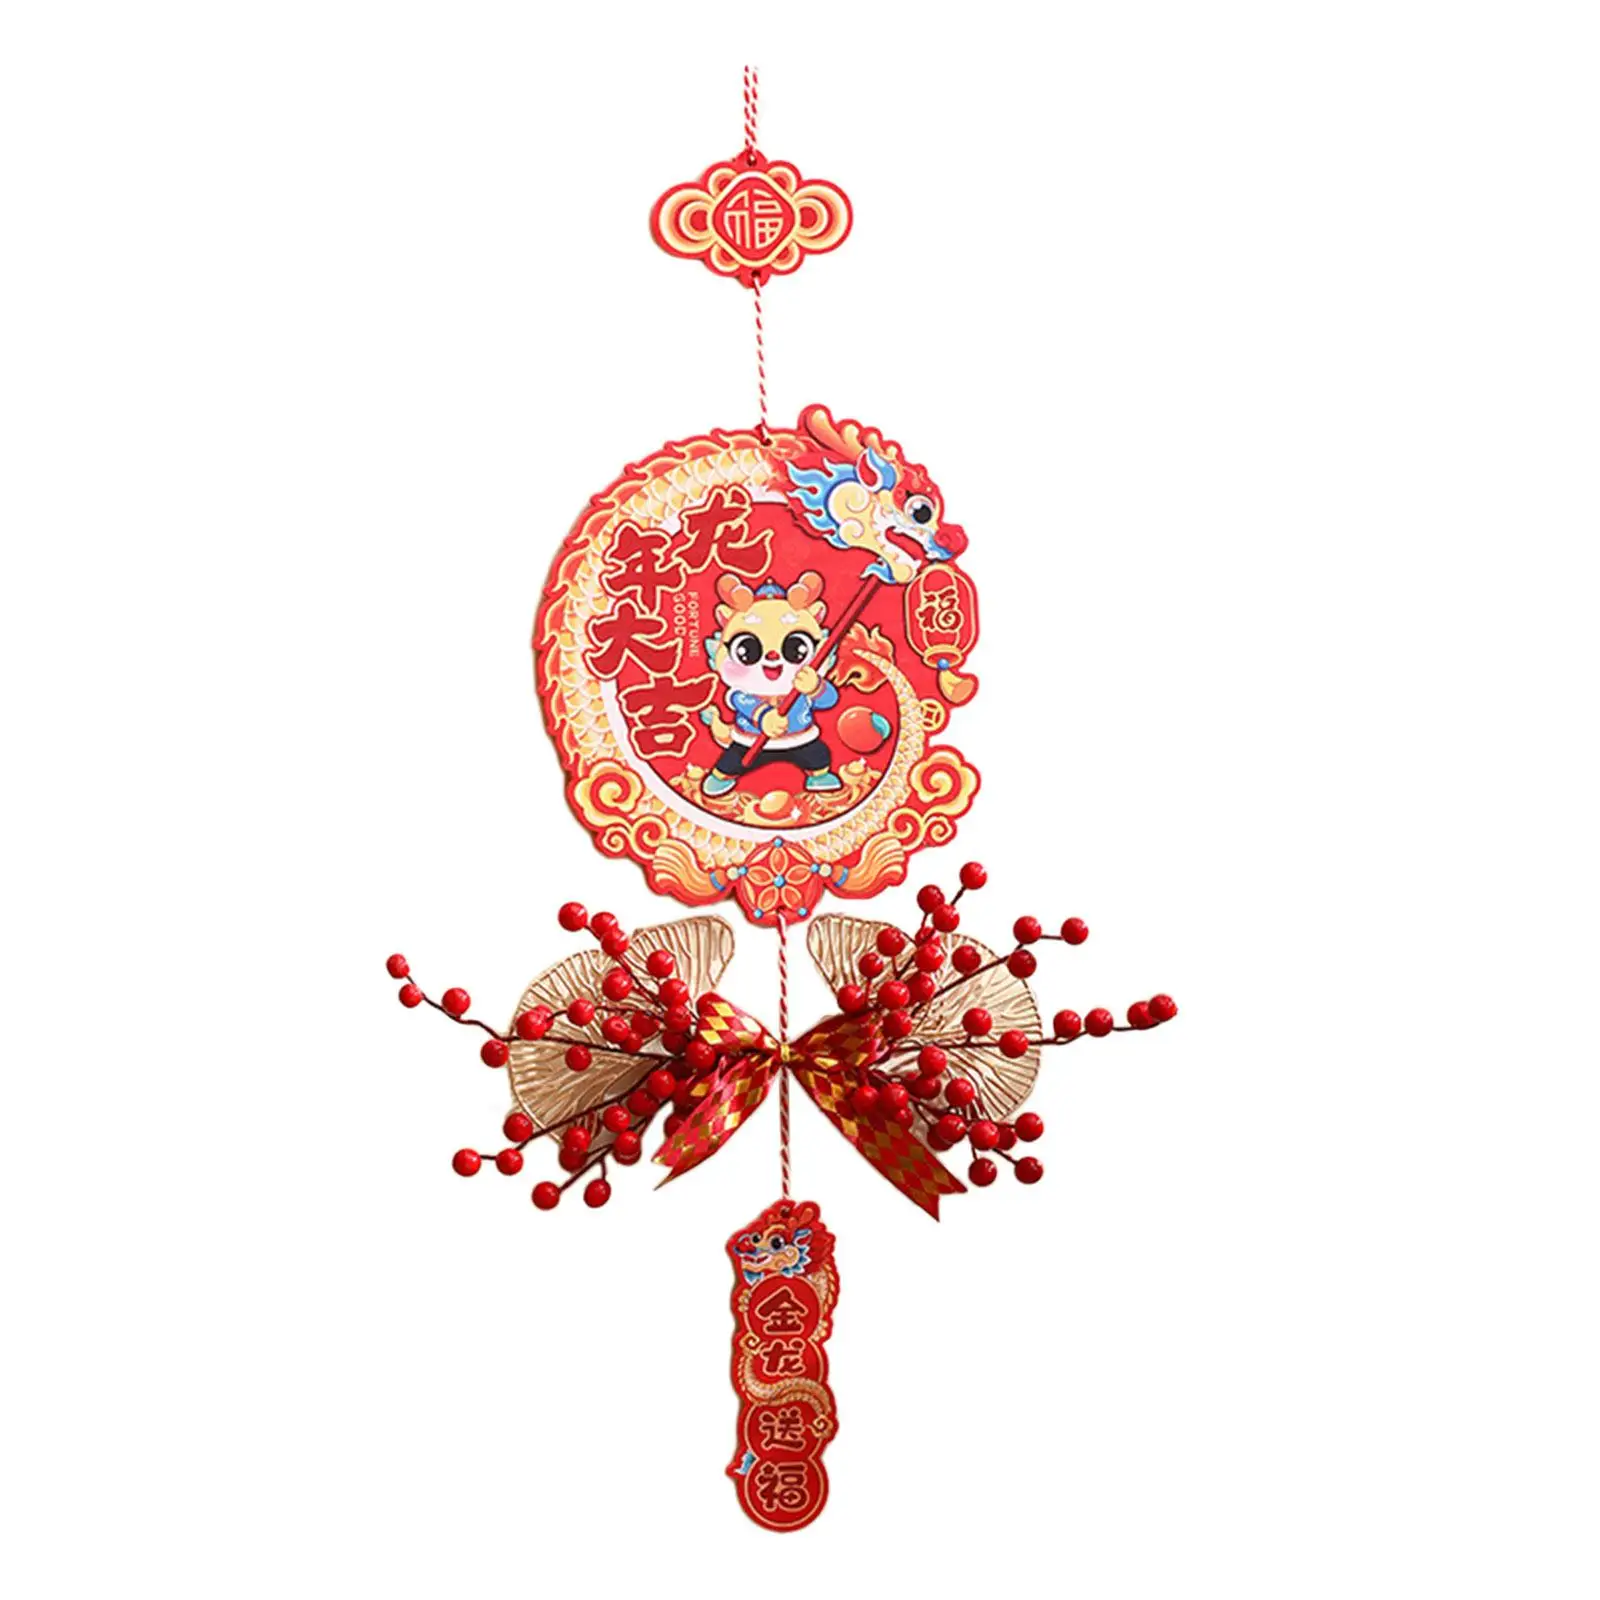 Spring Festival Fu Character Hanging Ornament Decor with Blessed Words for